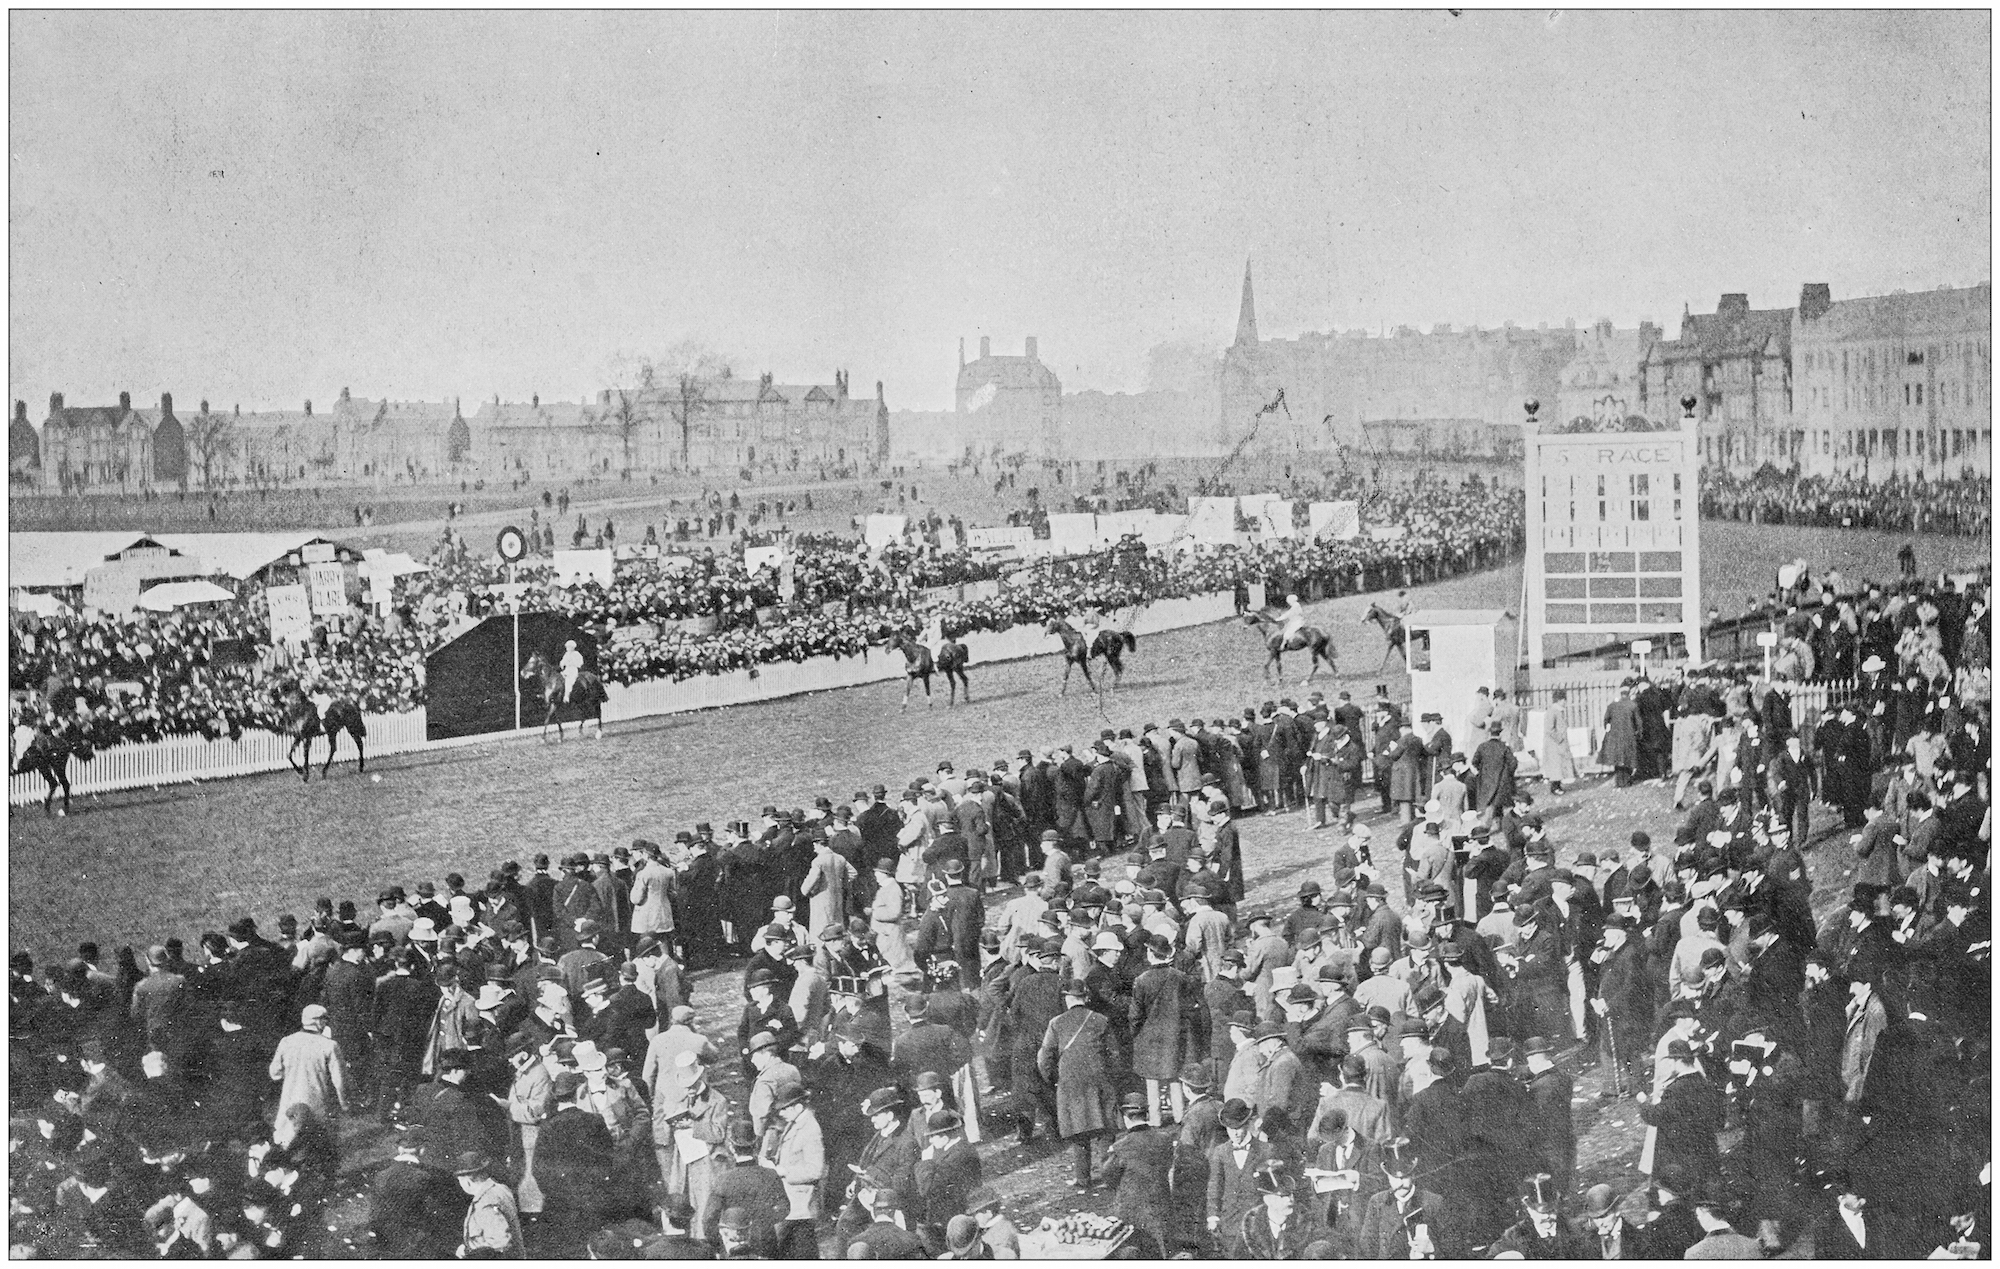 Crowds gather at Northampton Racecourse in the late 19th century. Photo: iStock.com/ilbusca